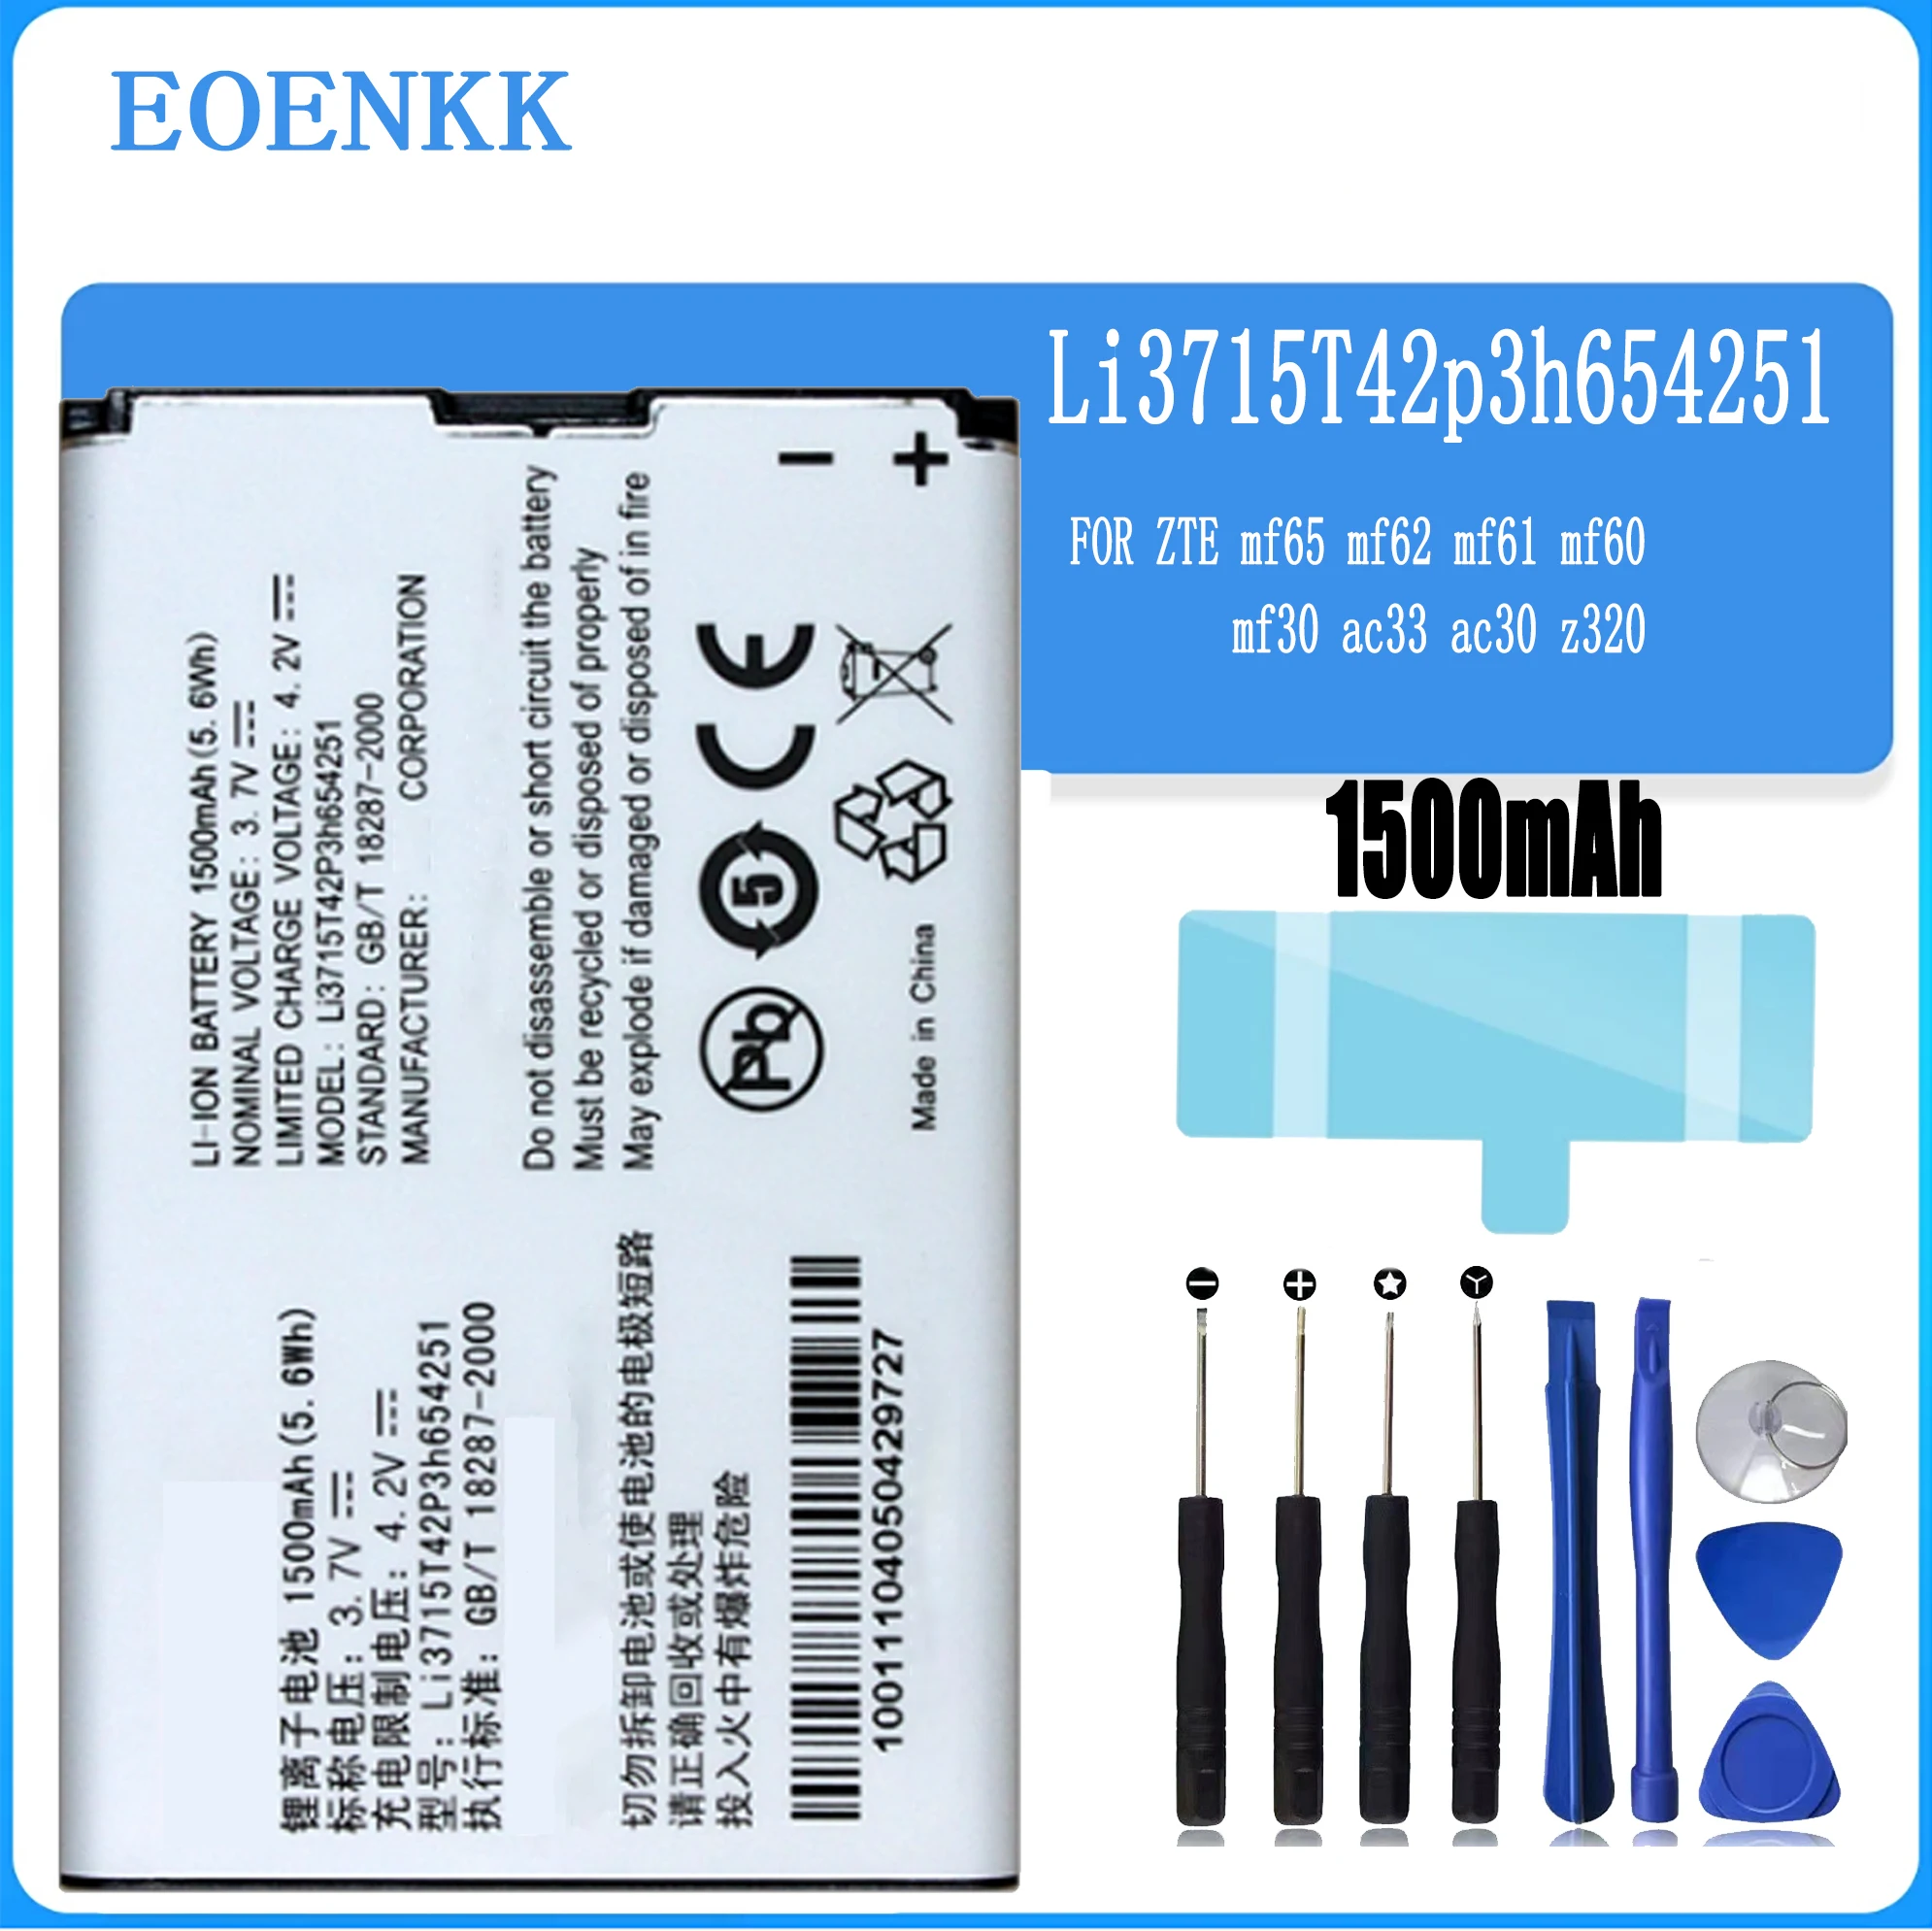 Original Replacement Battery For li3715t42p3h654251 FOR ZTE mf65 mf62 mf61 mf60 mf30 ac33 ac30 z320 Batteries Bateria enlarge